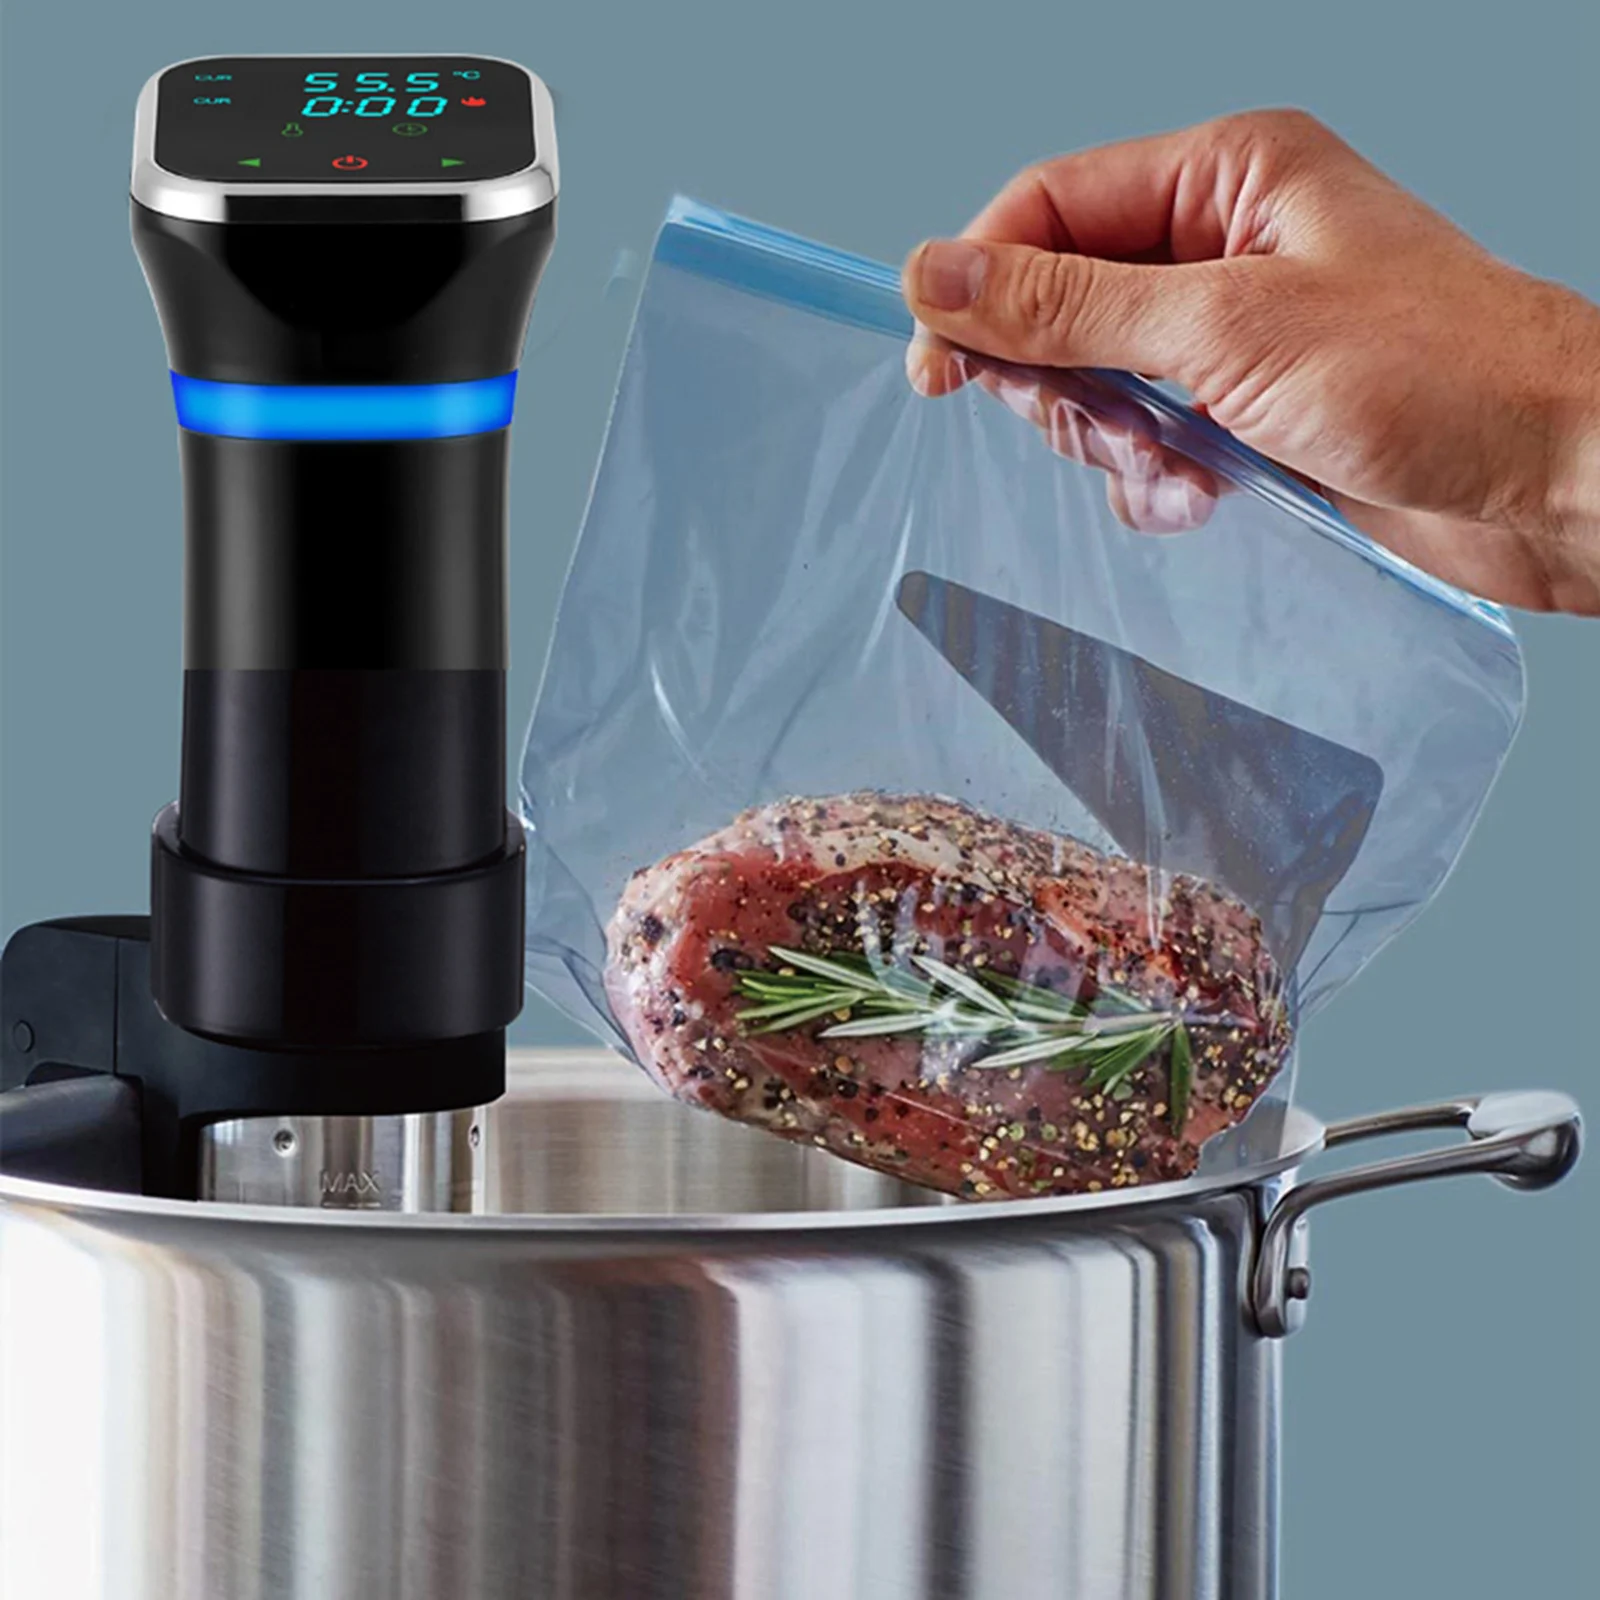 Portable 1100W Vacuum Food Sous Vide Machine Precision Cooker Cooking Device Sturdy Immersion Circulator Digital Timer, UK Plug